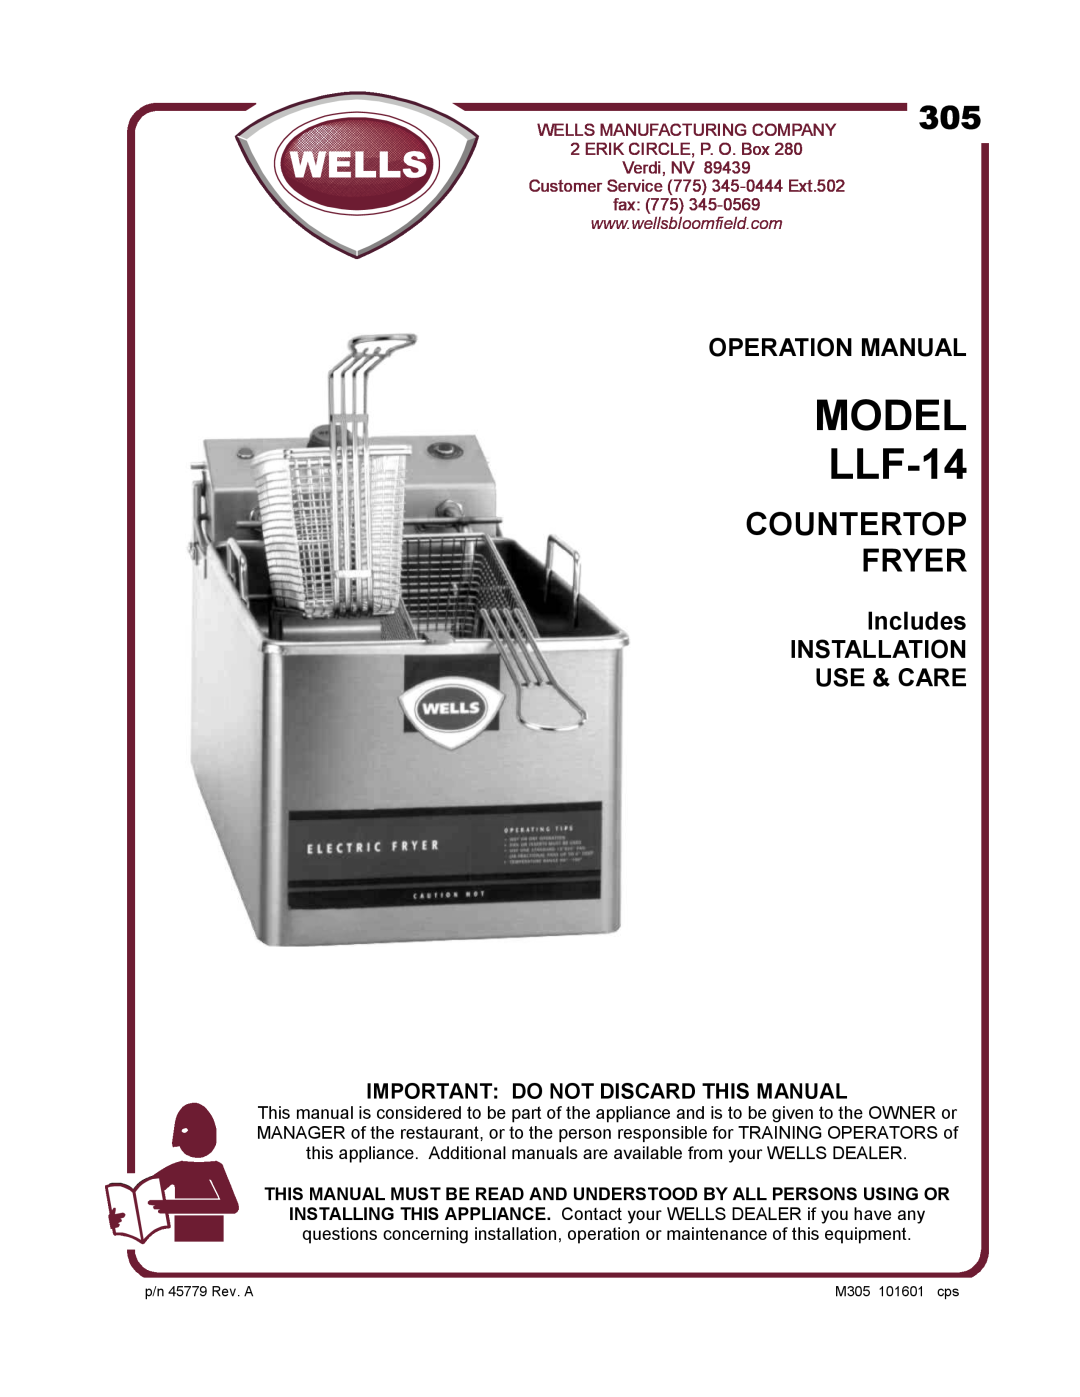 Wells Model LLF-14 operation manual Includes INSTALLATION USE & CARE, Important Do Not Discard This Manual, MODEL LLF-14 